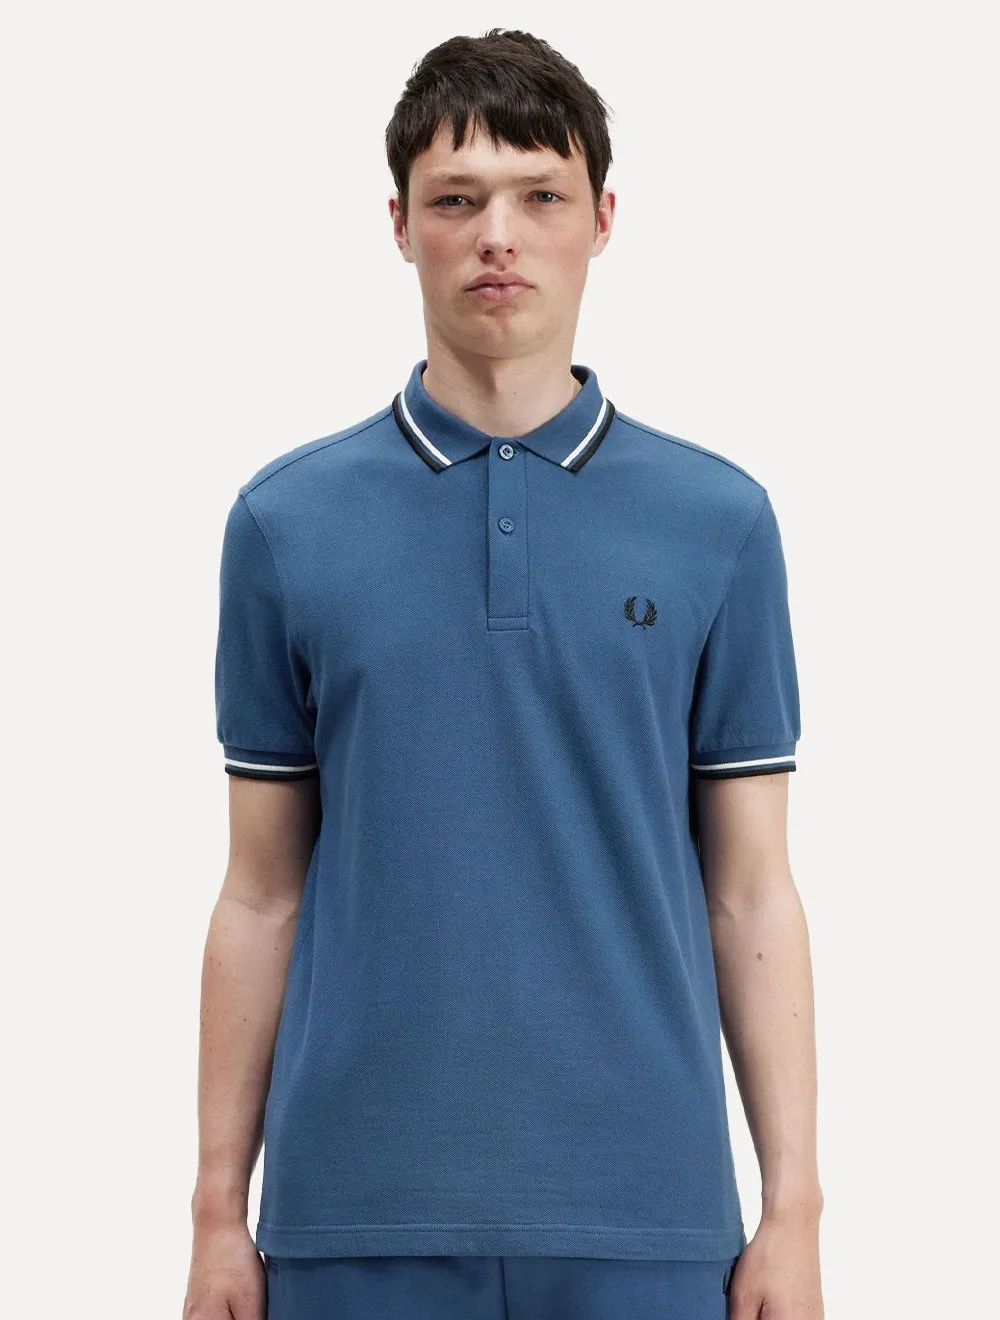 Polo Fred Perry Masculina Piquet Regular Black White Twin Tipped Azul Médio